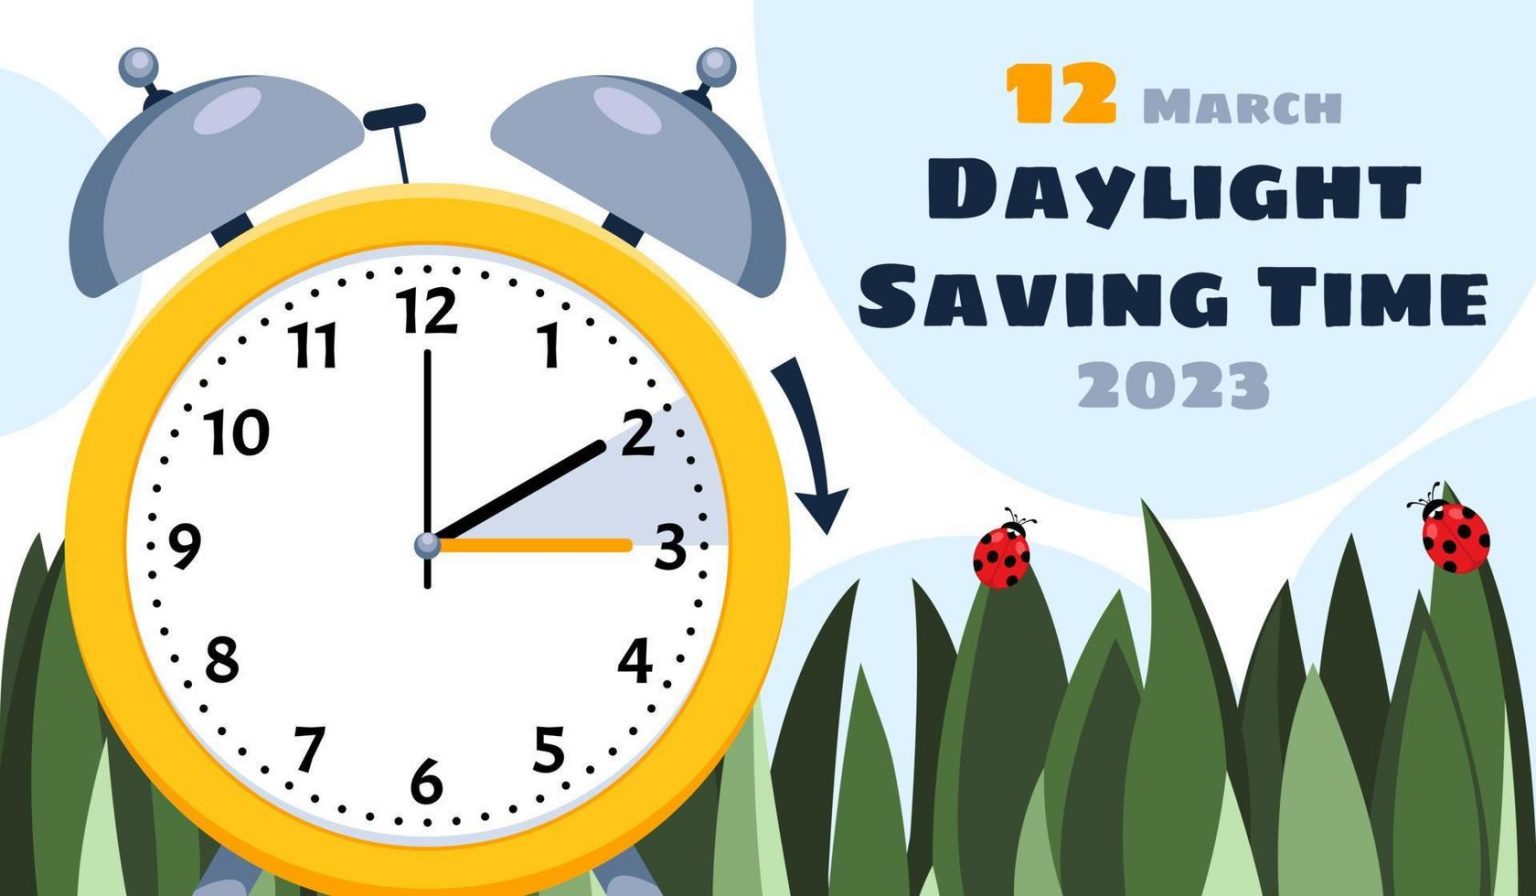 Daylight Saving Time begins on Sunday, March 12, 2023 at 200 A.M.